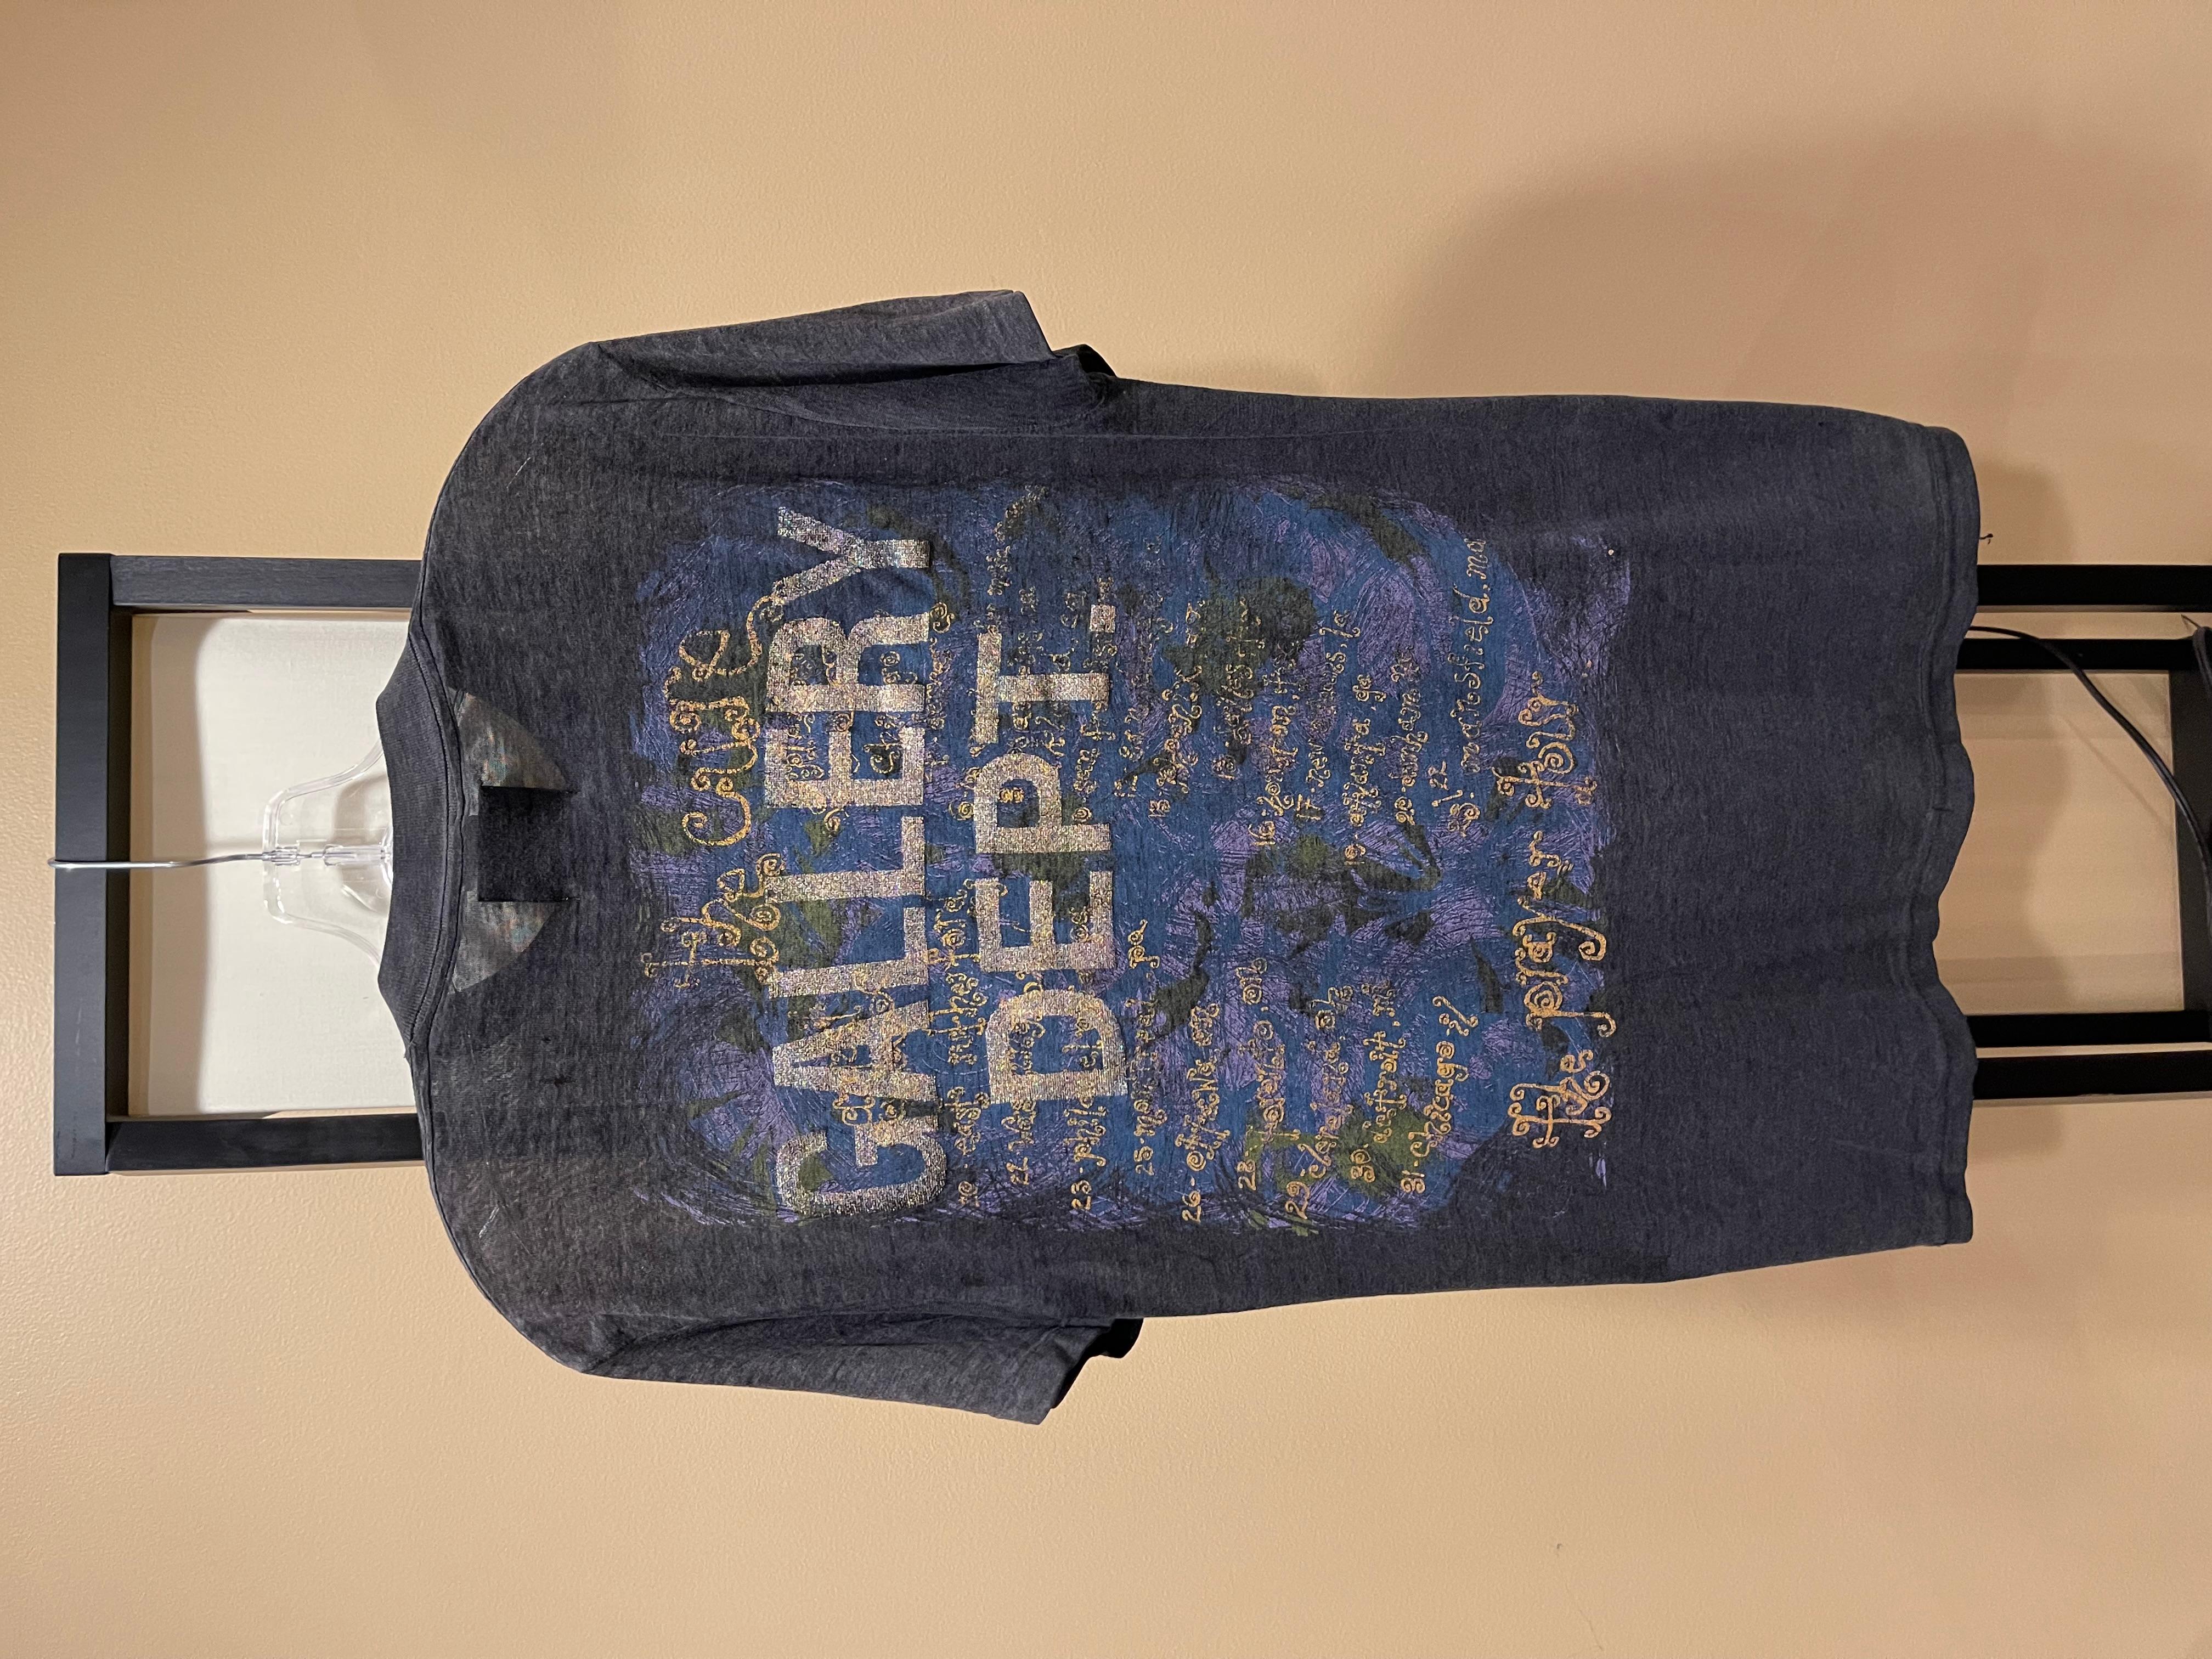 Gallery Dept Vintage The Cure Band Tee / Prayers Tour
No size tag but fits S-M (see measurements)
Vintage condition (see all detailed pics)
Amazing soft feel with distressing
EXTREMELY RARE AND LIMITED Gallery Dept vintage tee. This is a 1 of 1 from